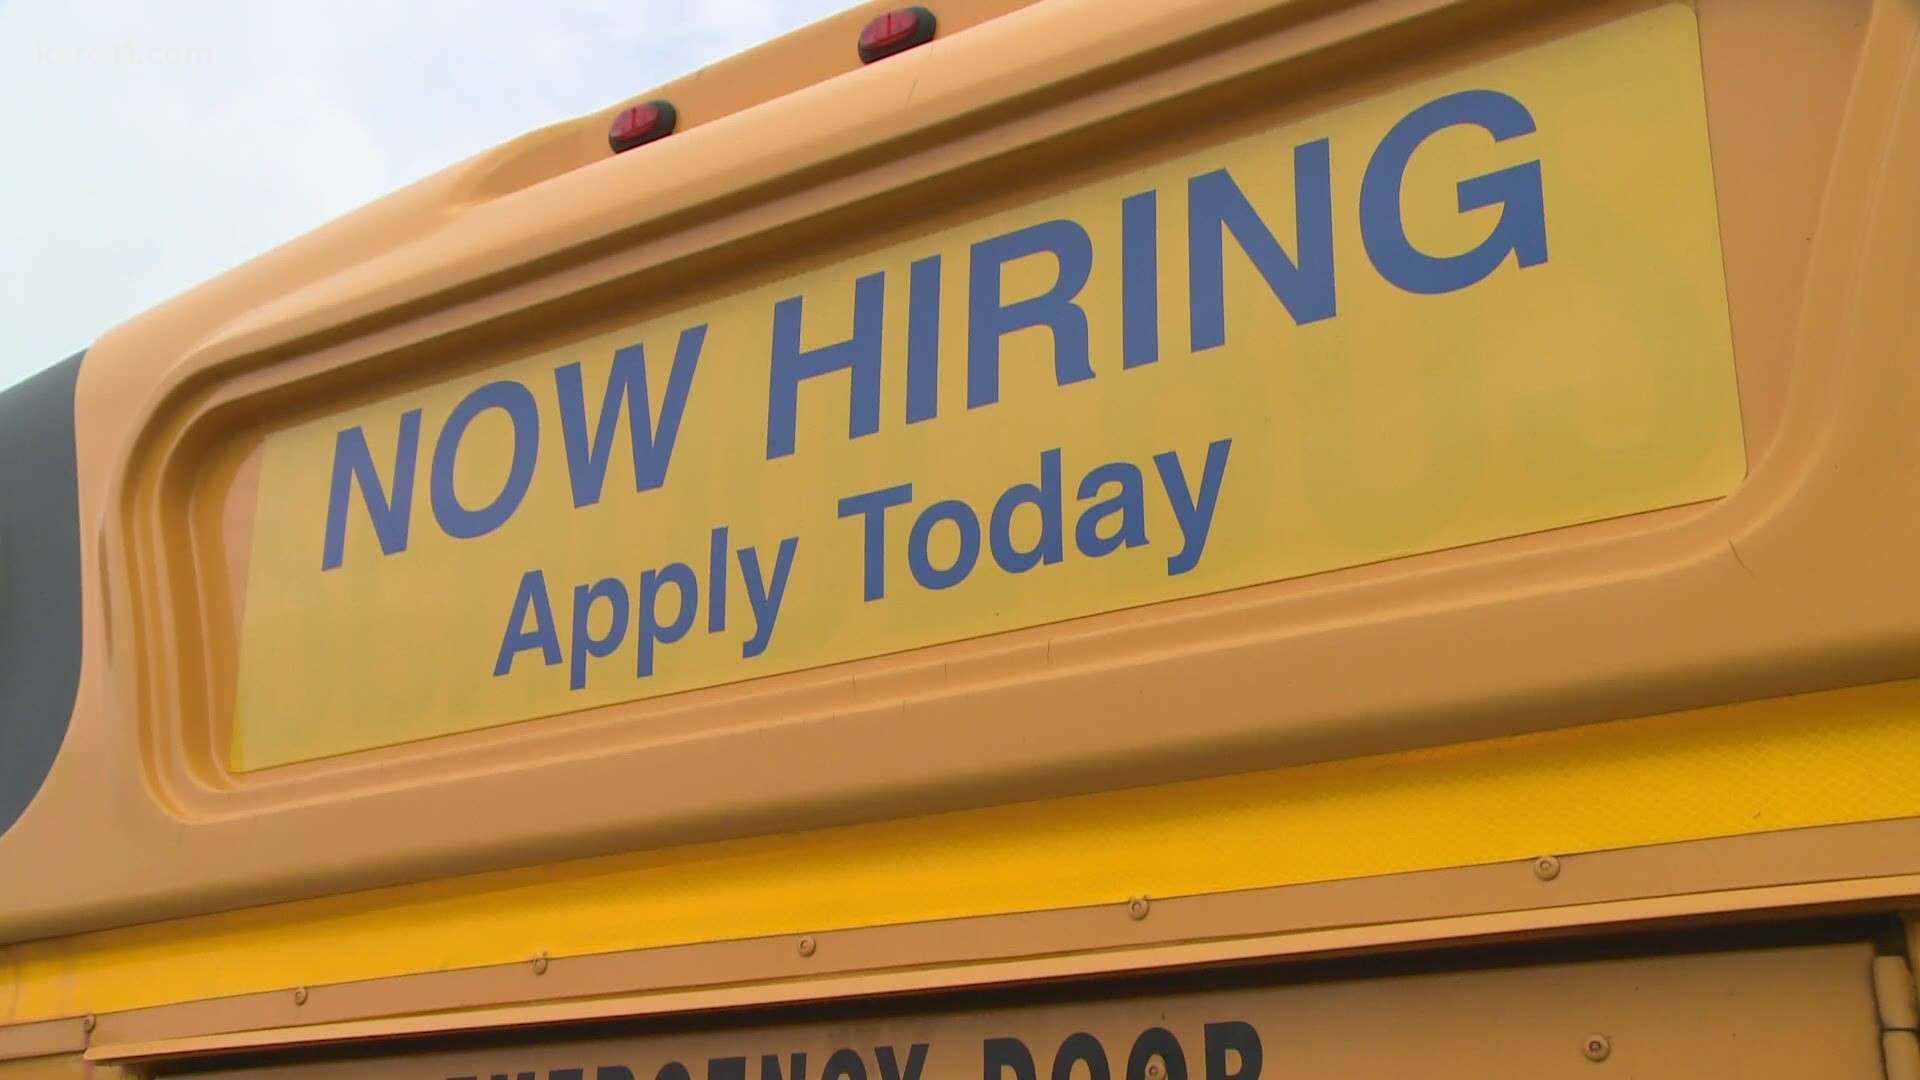 Companies are offering flexible schedules and bonuses to try to fill vacant bus driver spots.